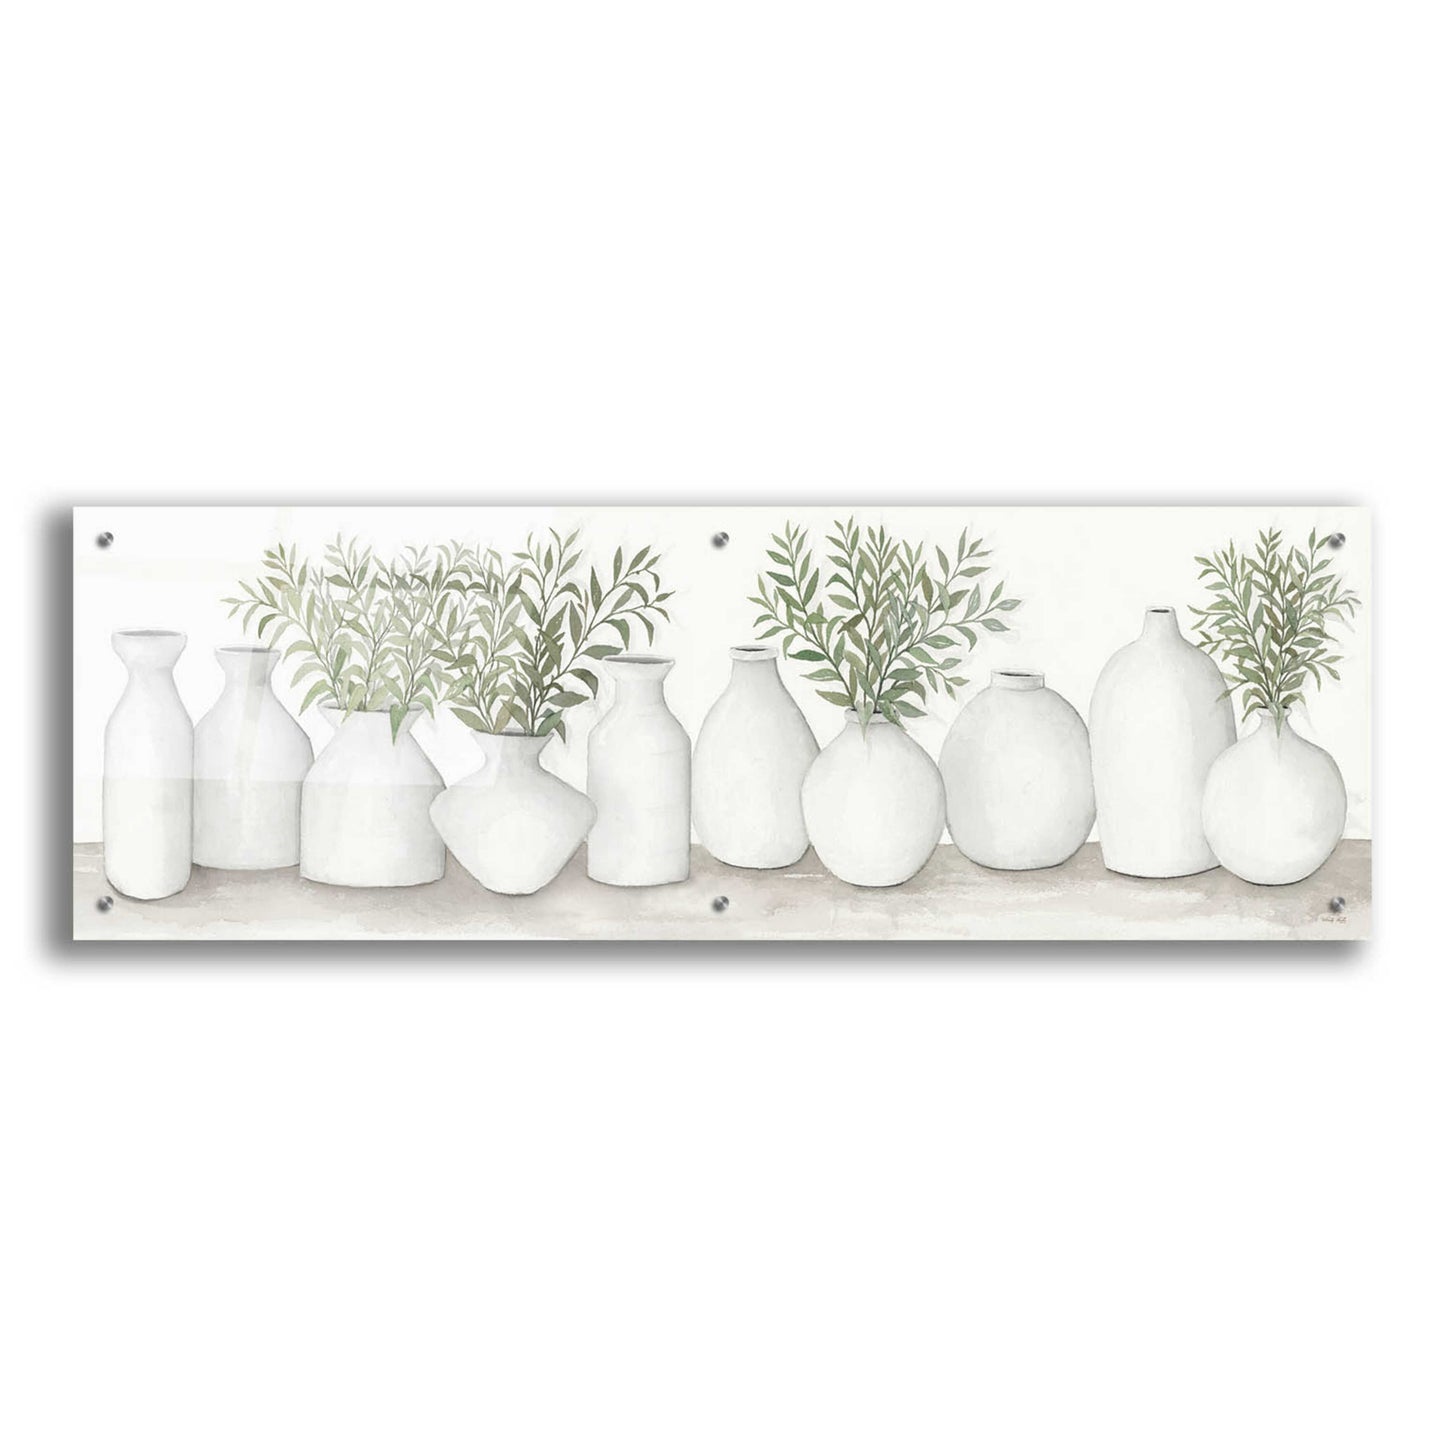 Epic Art 'White Vases Still Life' by Cindy Jacobs, Acrylic Glass Wall Art,48x16